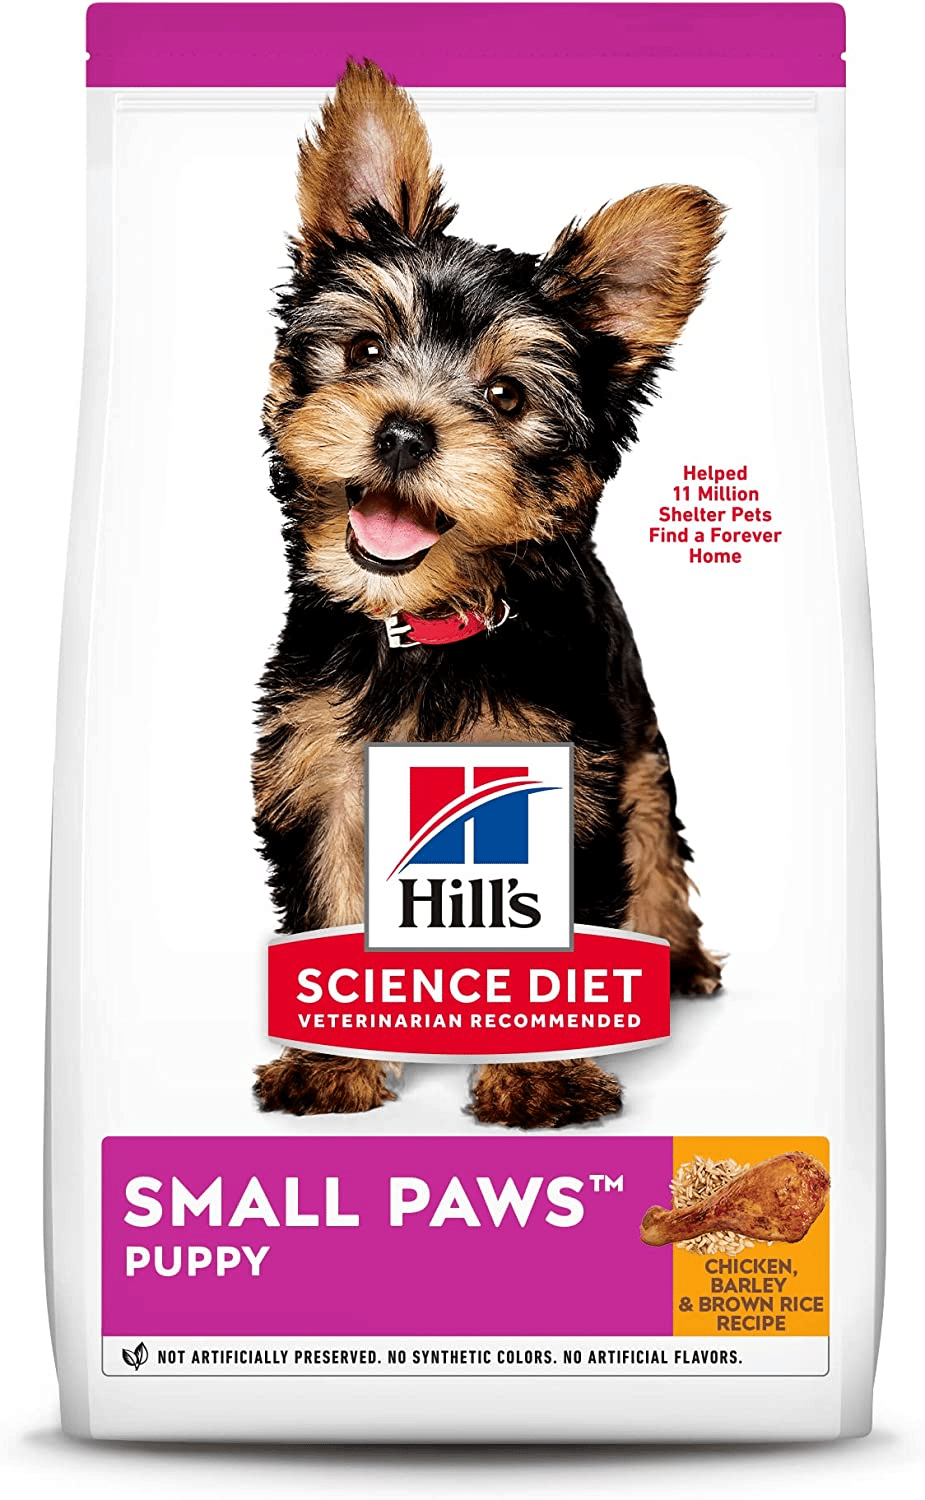 Hill’s Science Diet Dry Dog Food Logo